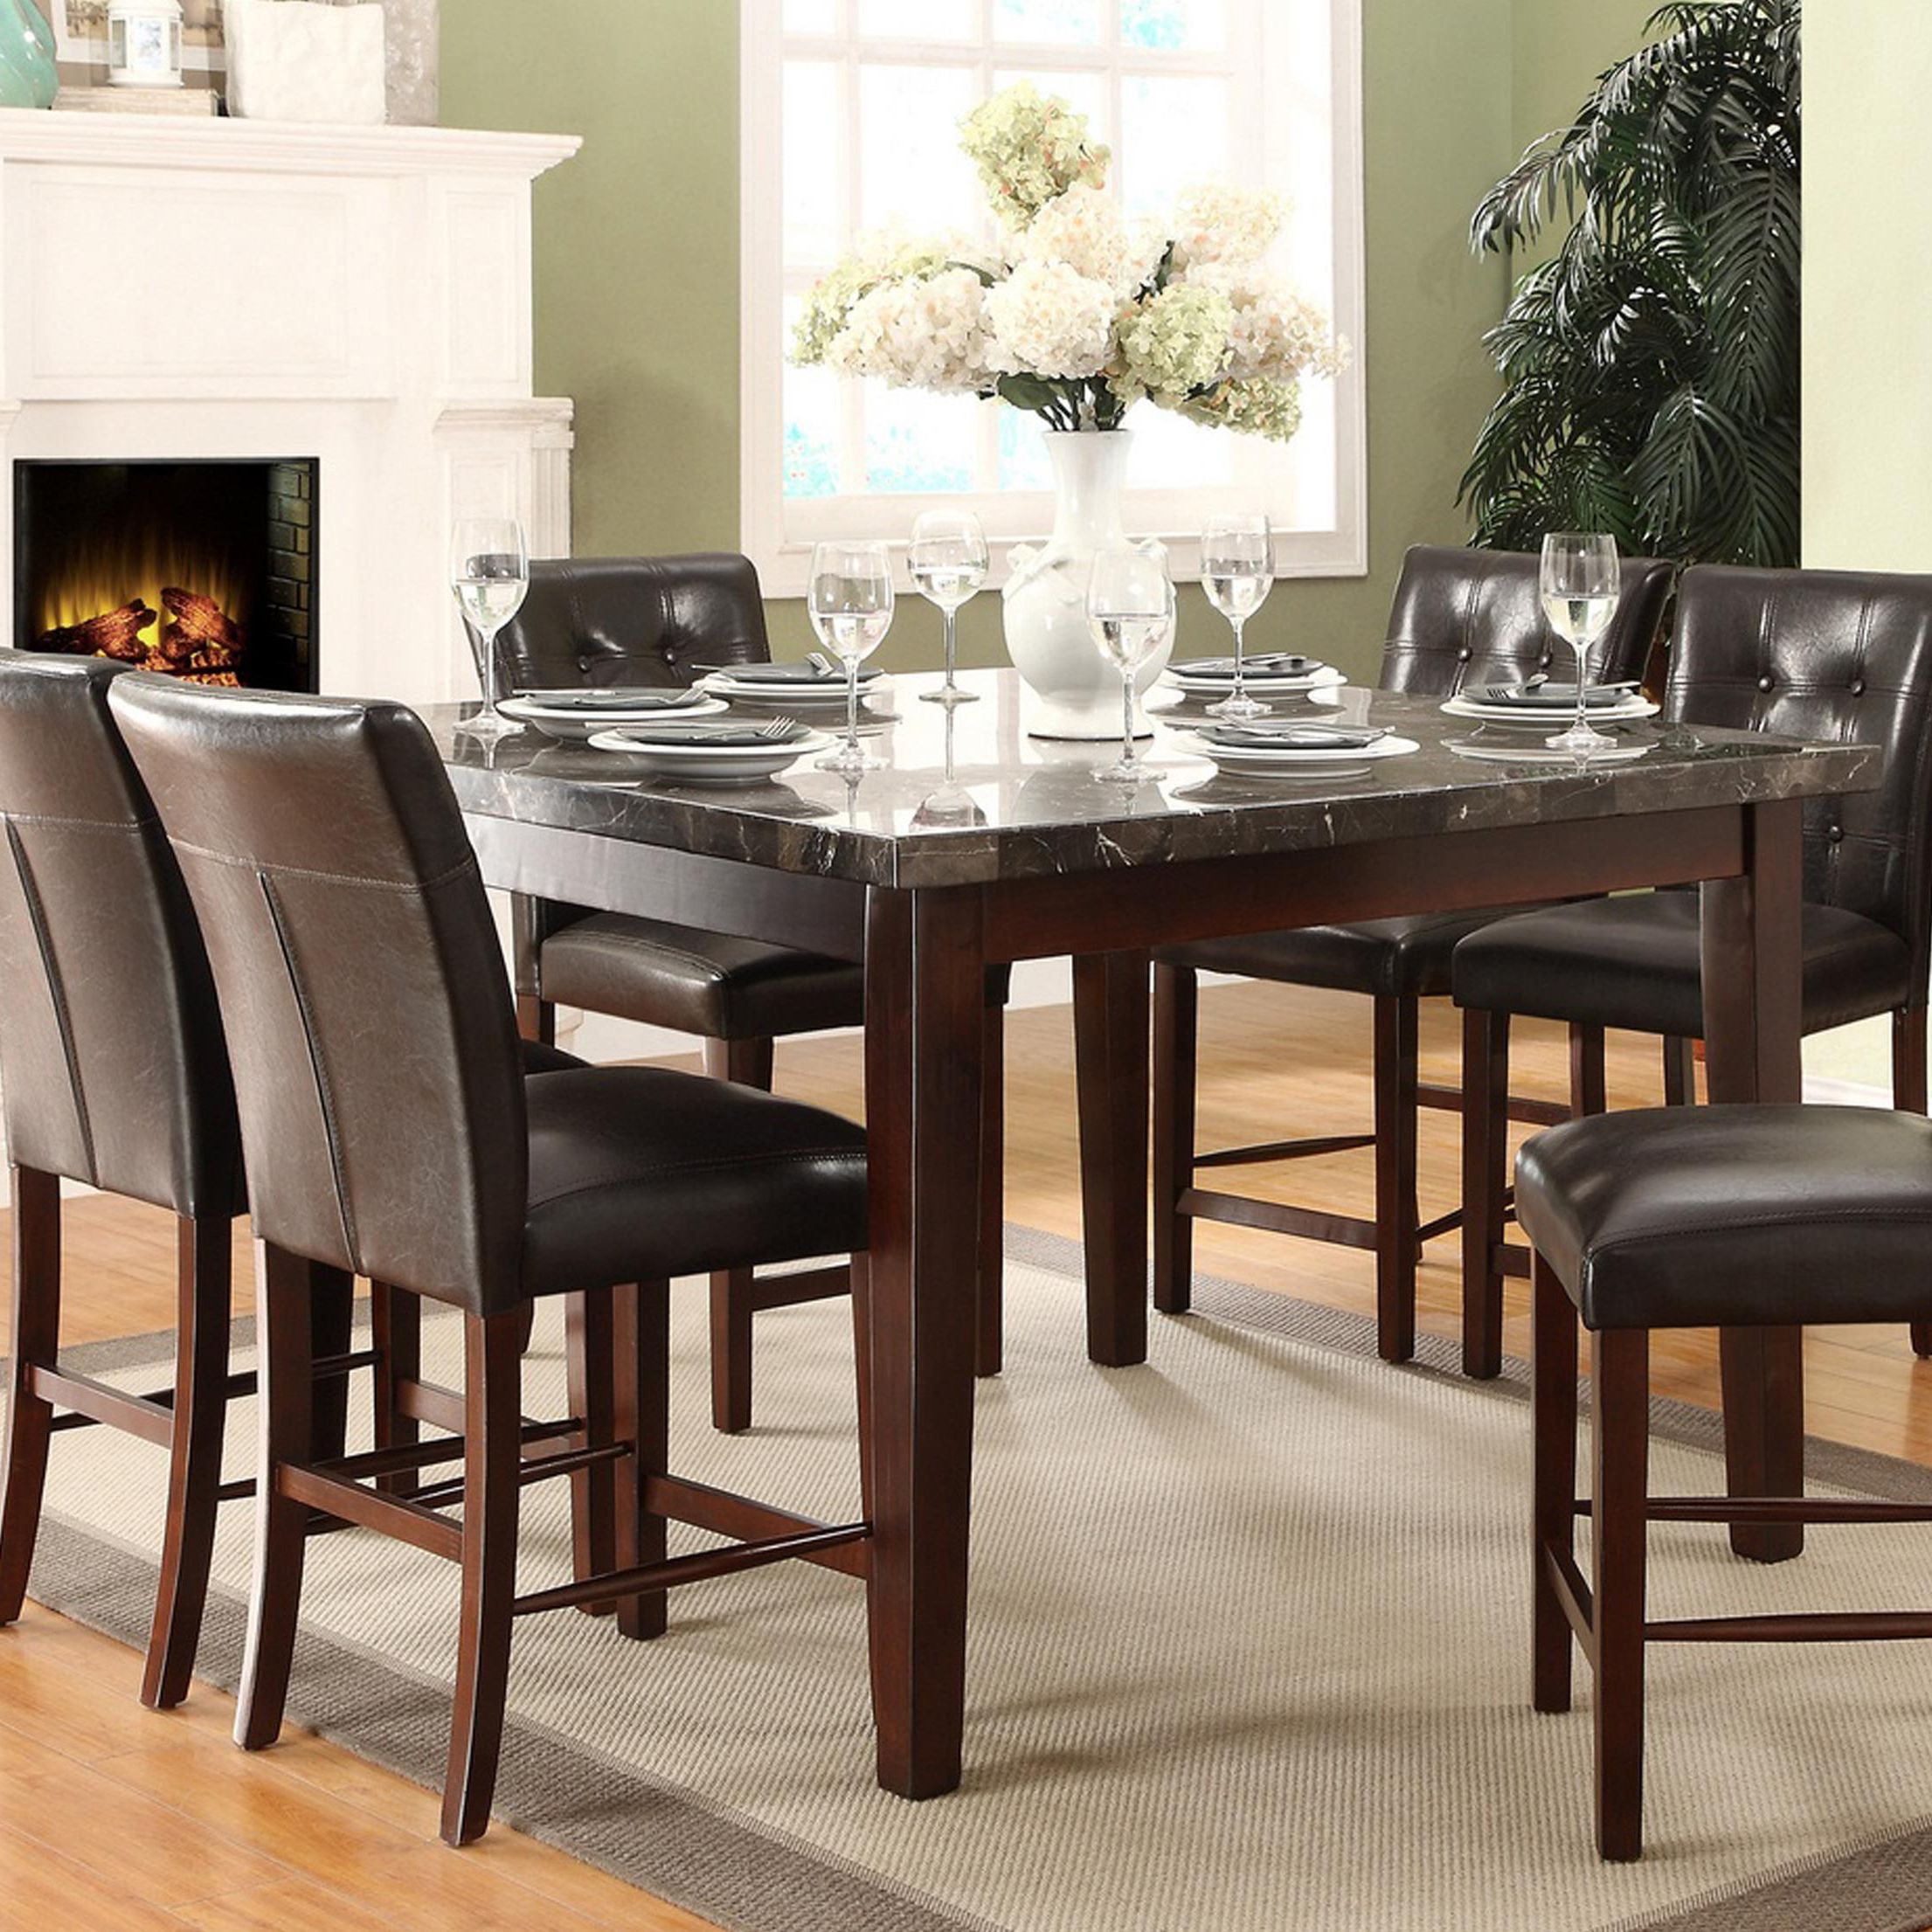 Homelegance Decatur Counter Height Dining Table With Regarding Well Known Shoaib Counter Height Dining Tables (View 11 of 20)